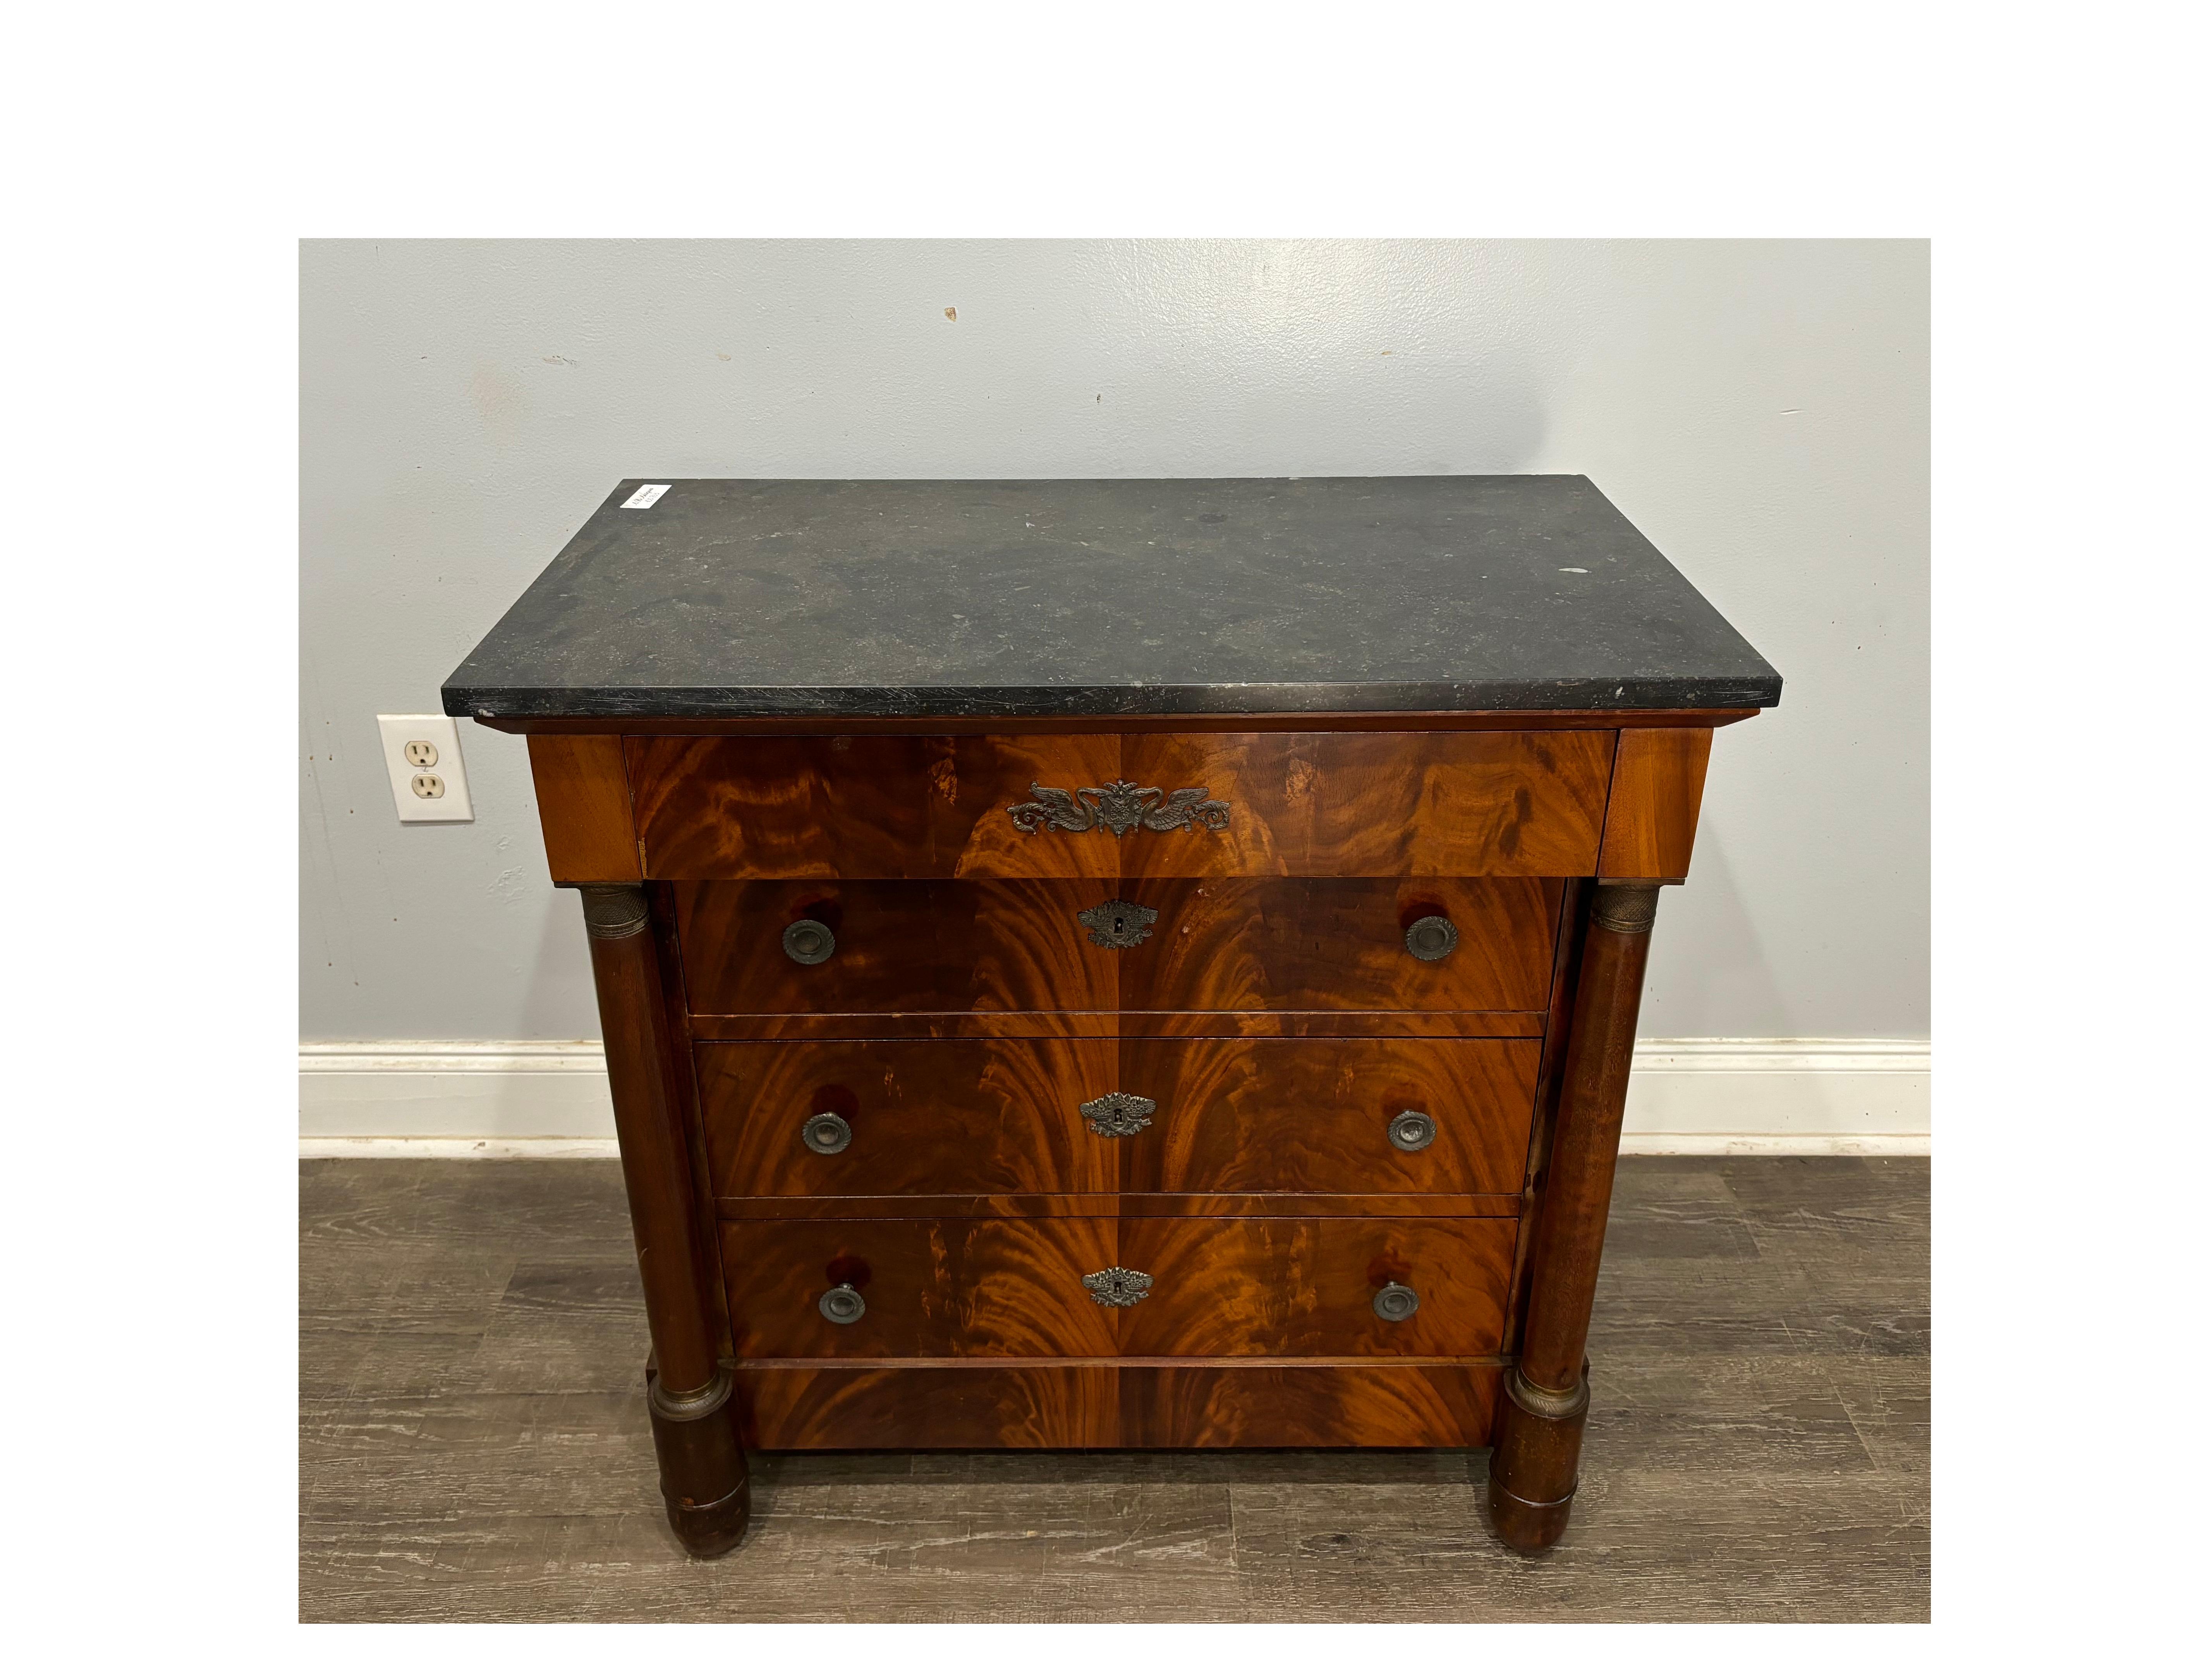 This Charming Small Empire Commode is made of mahogany with a black marble top. It has bronze rings around the columns. Easy to place anywhere.